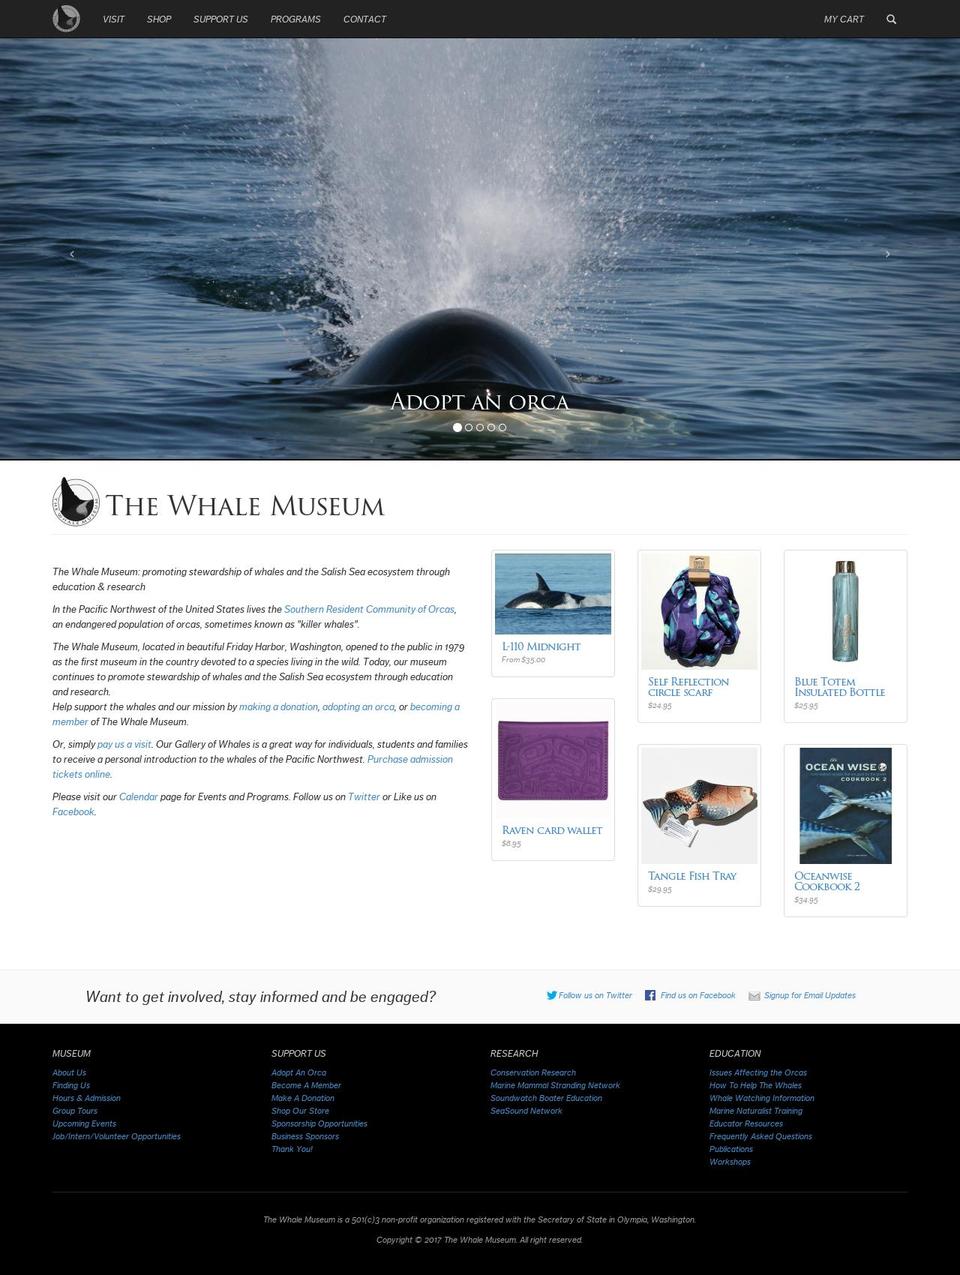 the-whale-musuem Shopify theme site example whalemuseum.org